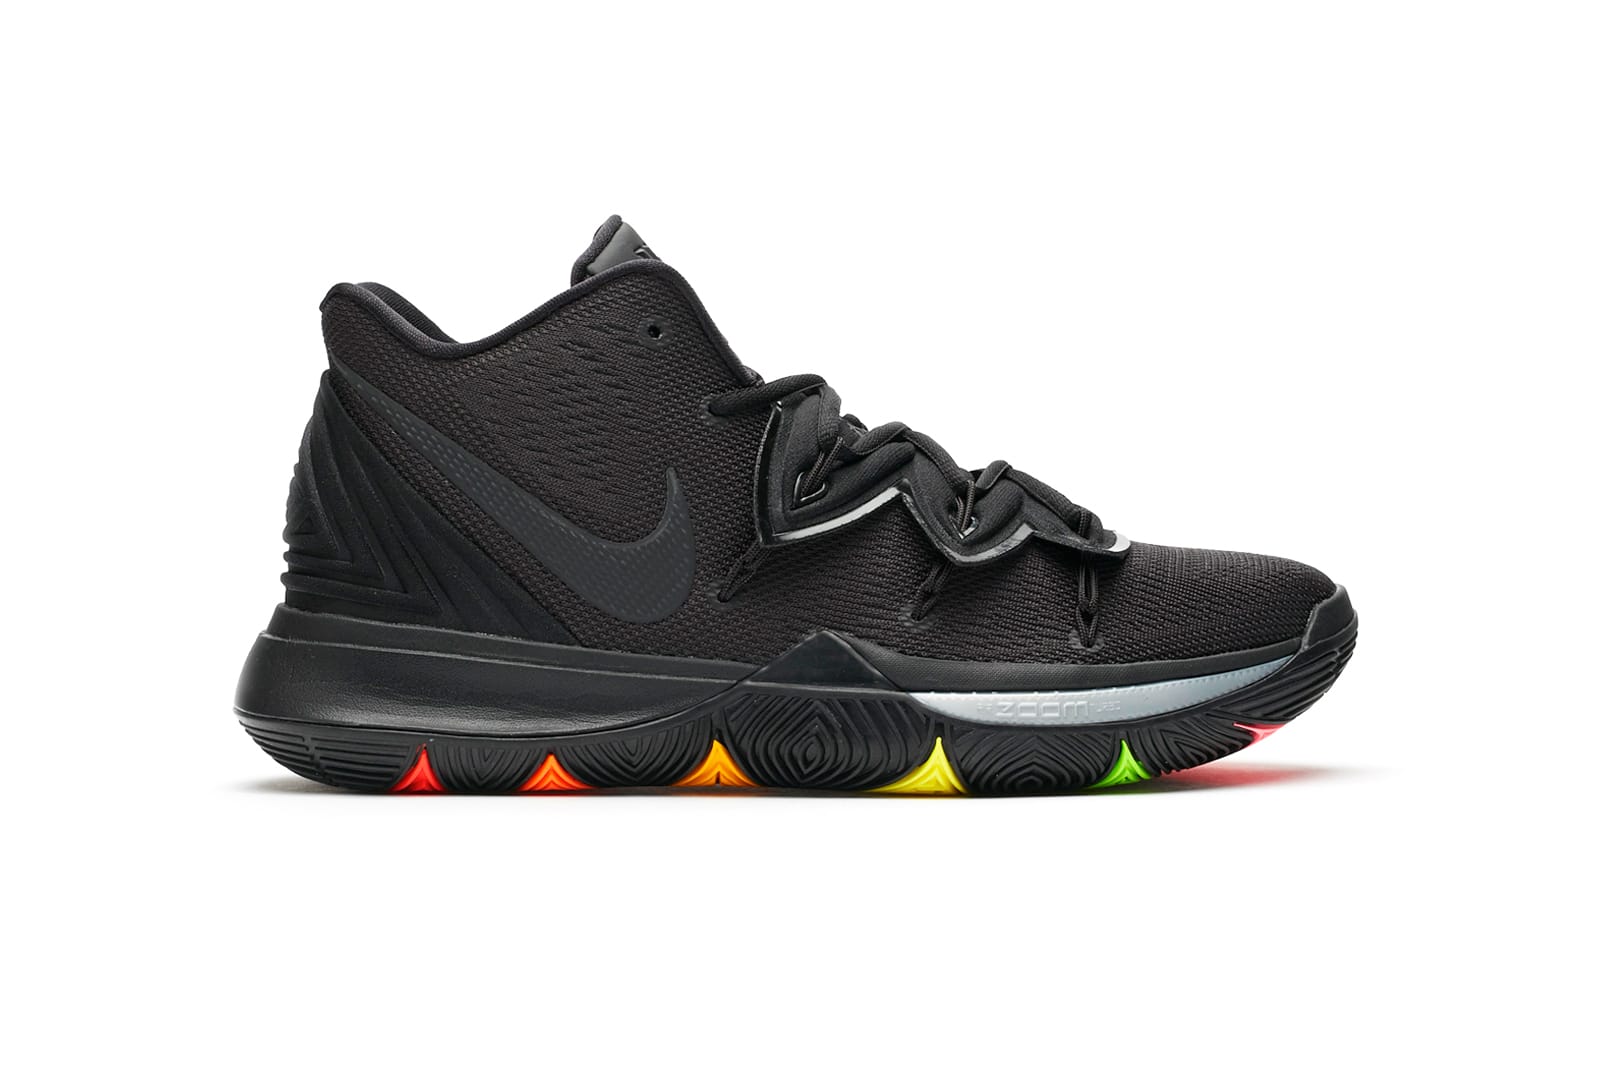 kyrie 5 bred release date Shop Clothing Shoes Online